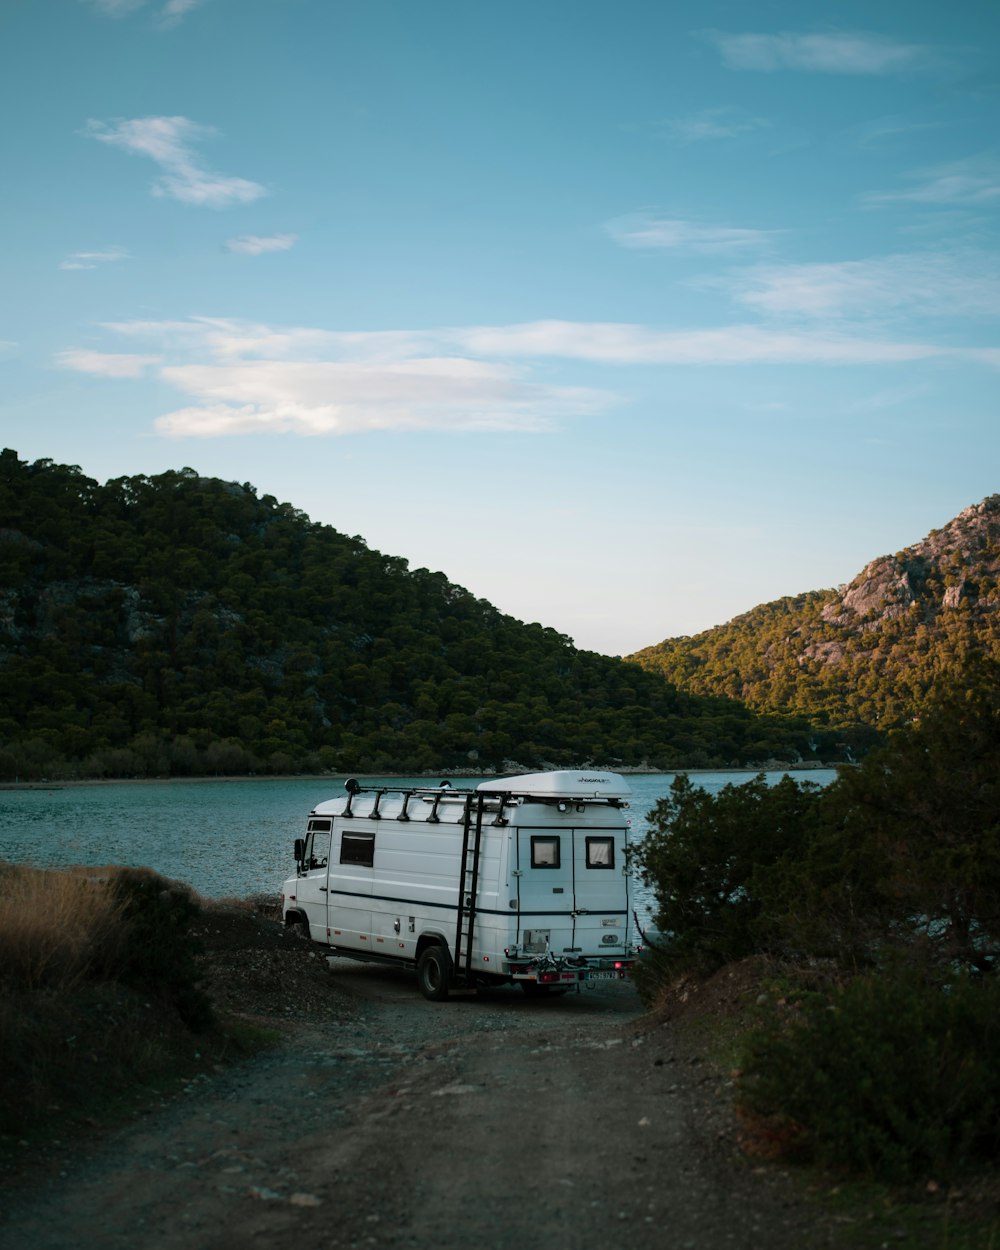 a camper van parked on a dirt road next to a body of water